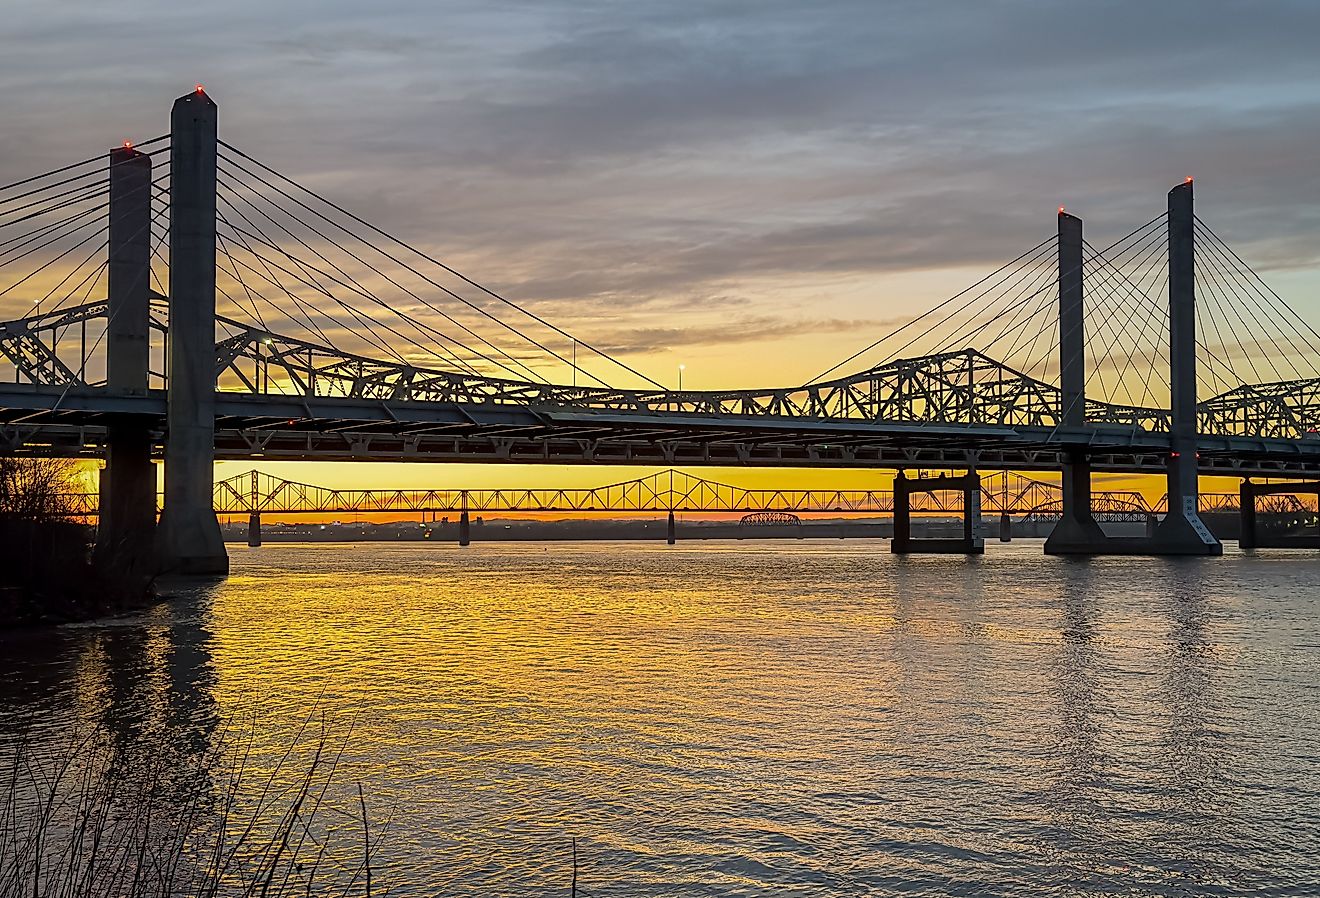 John F. Kennedy Bridge and Abraham Lincoln Bridge crossing the Ohio River between Louisville, Kentucky and Jeffersonville, Indiana at sunset. Image credit Carrie A Hanrahan via Shutterstock.